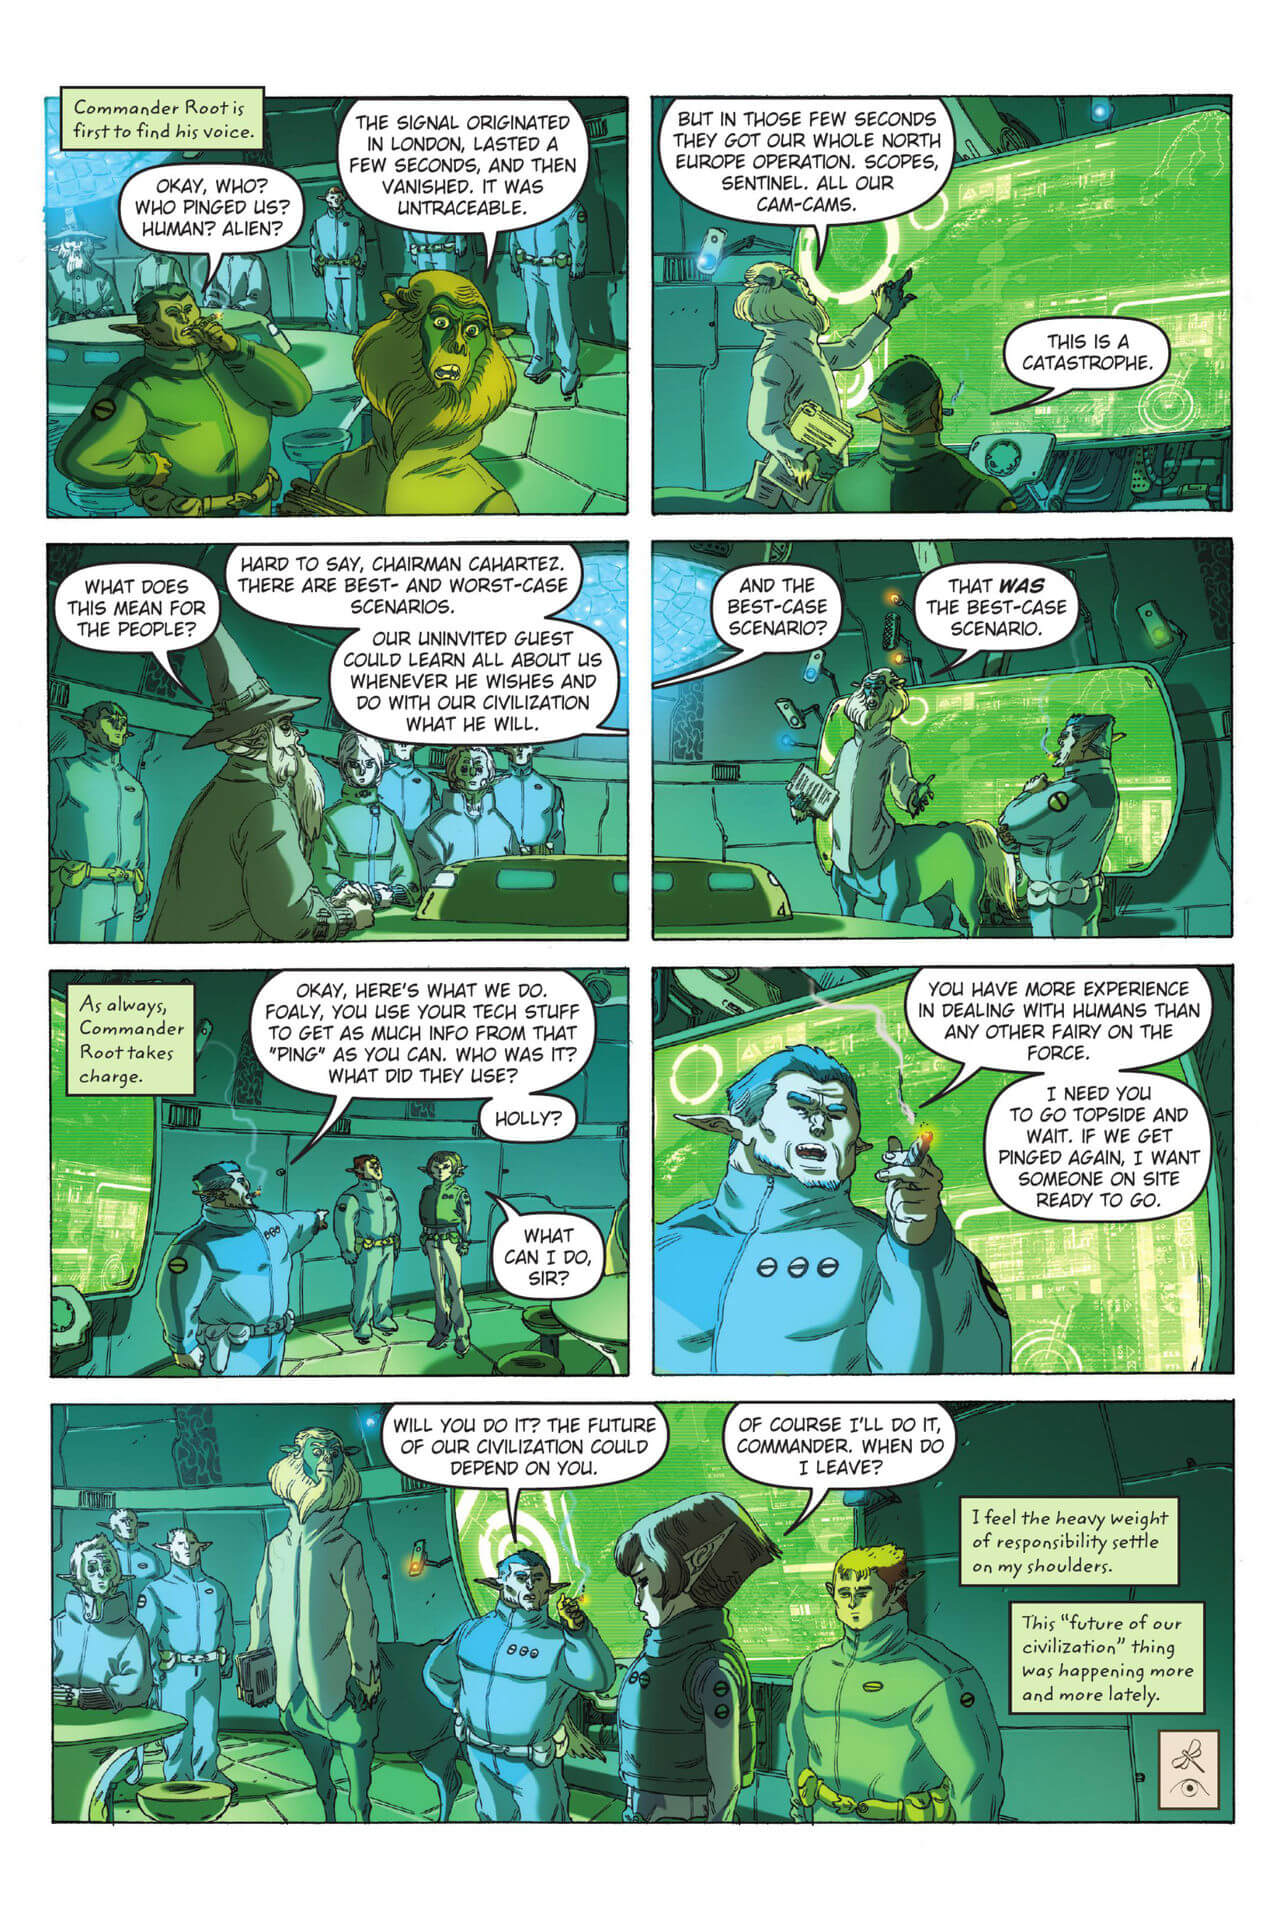 page 20 of artemis fowl eternity code graphic novel